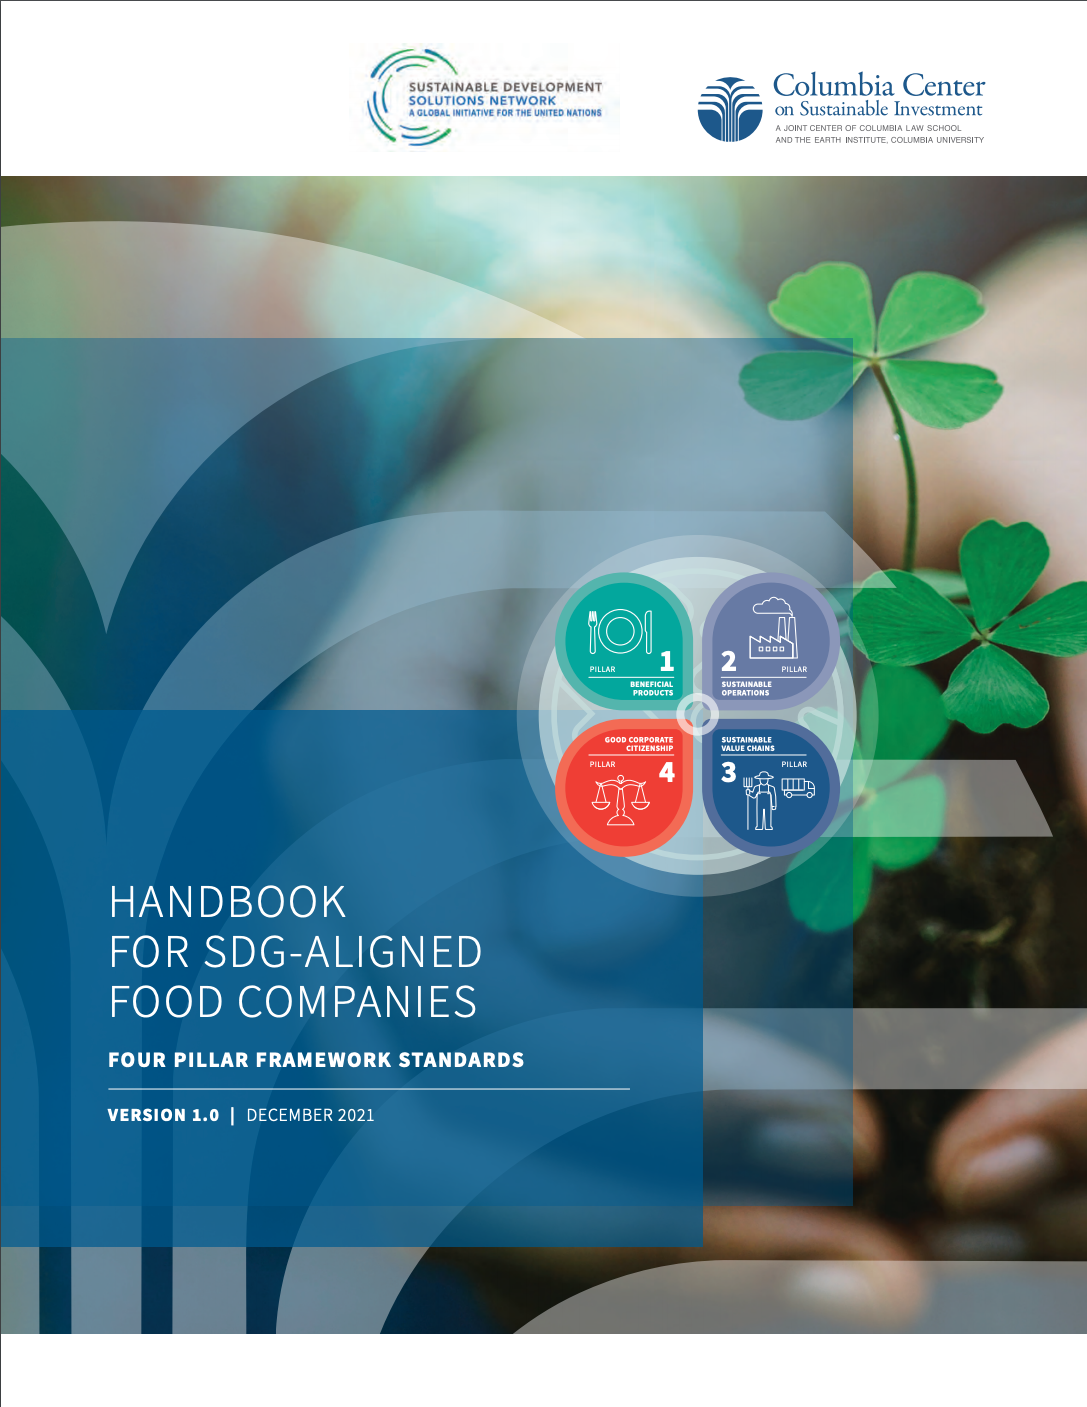 Cover page titled "Handbook for SDG-Aligned Food Companies" with the sub-title as "Four Pillar Framework Standards".